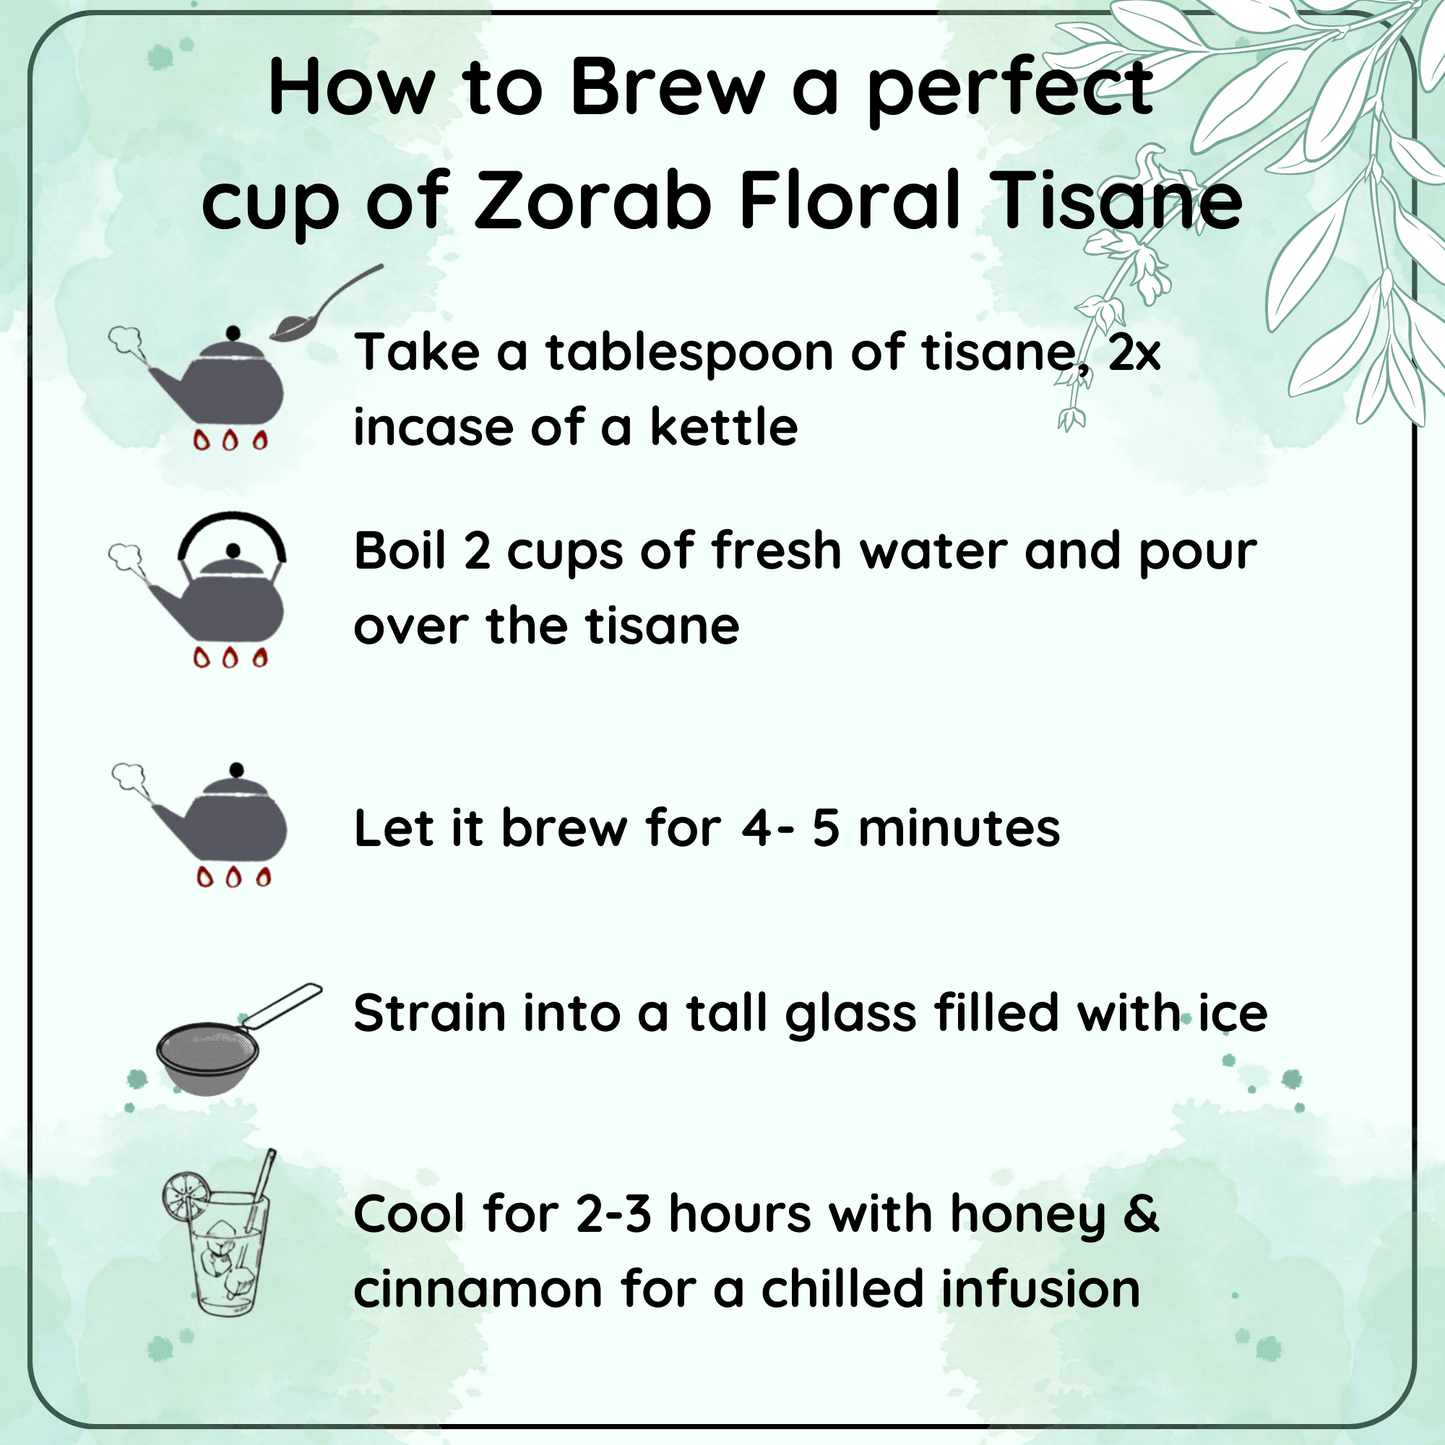 ANTI-AGEING Turkish Zorab Floral Tisane - A delightful blend of fragrant flavourful flavours of Turkey - Radhikas Fine Teas and Whatnots